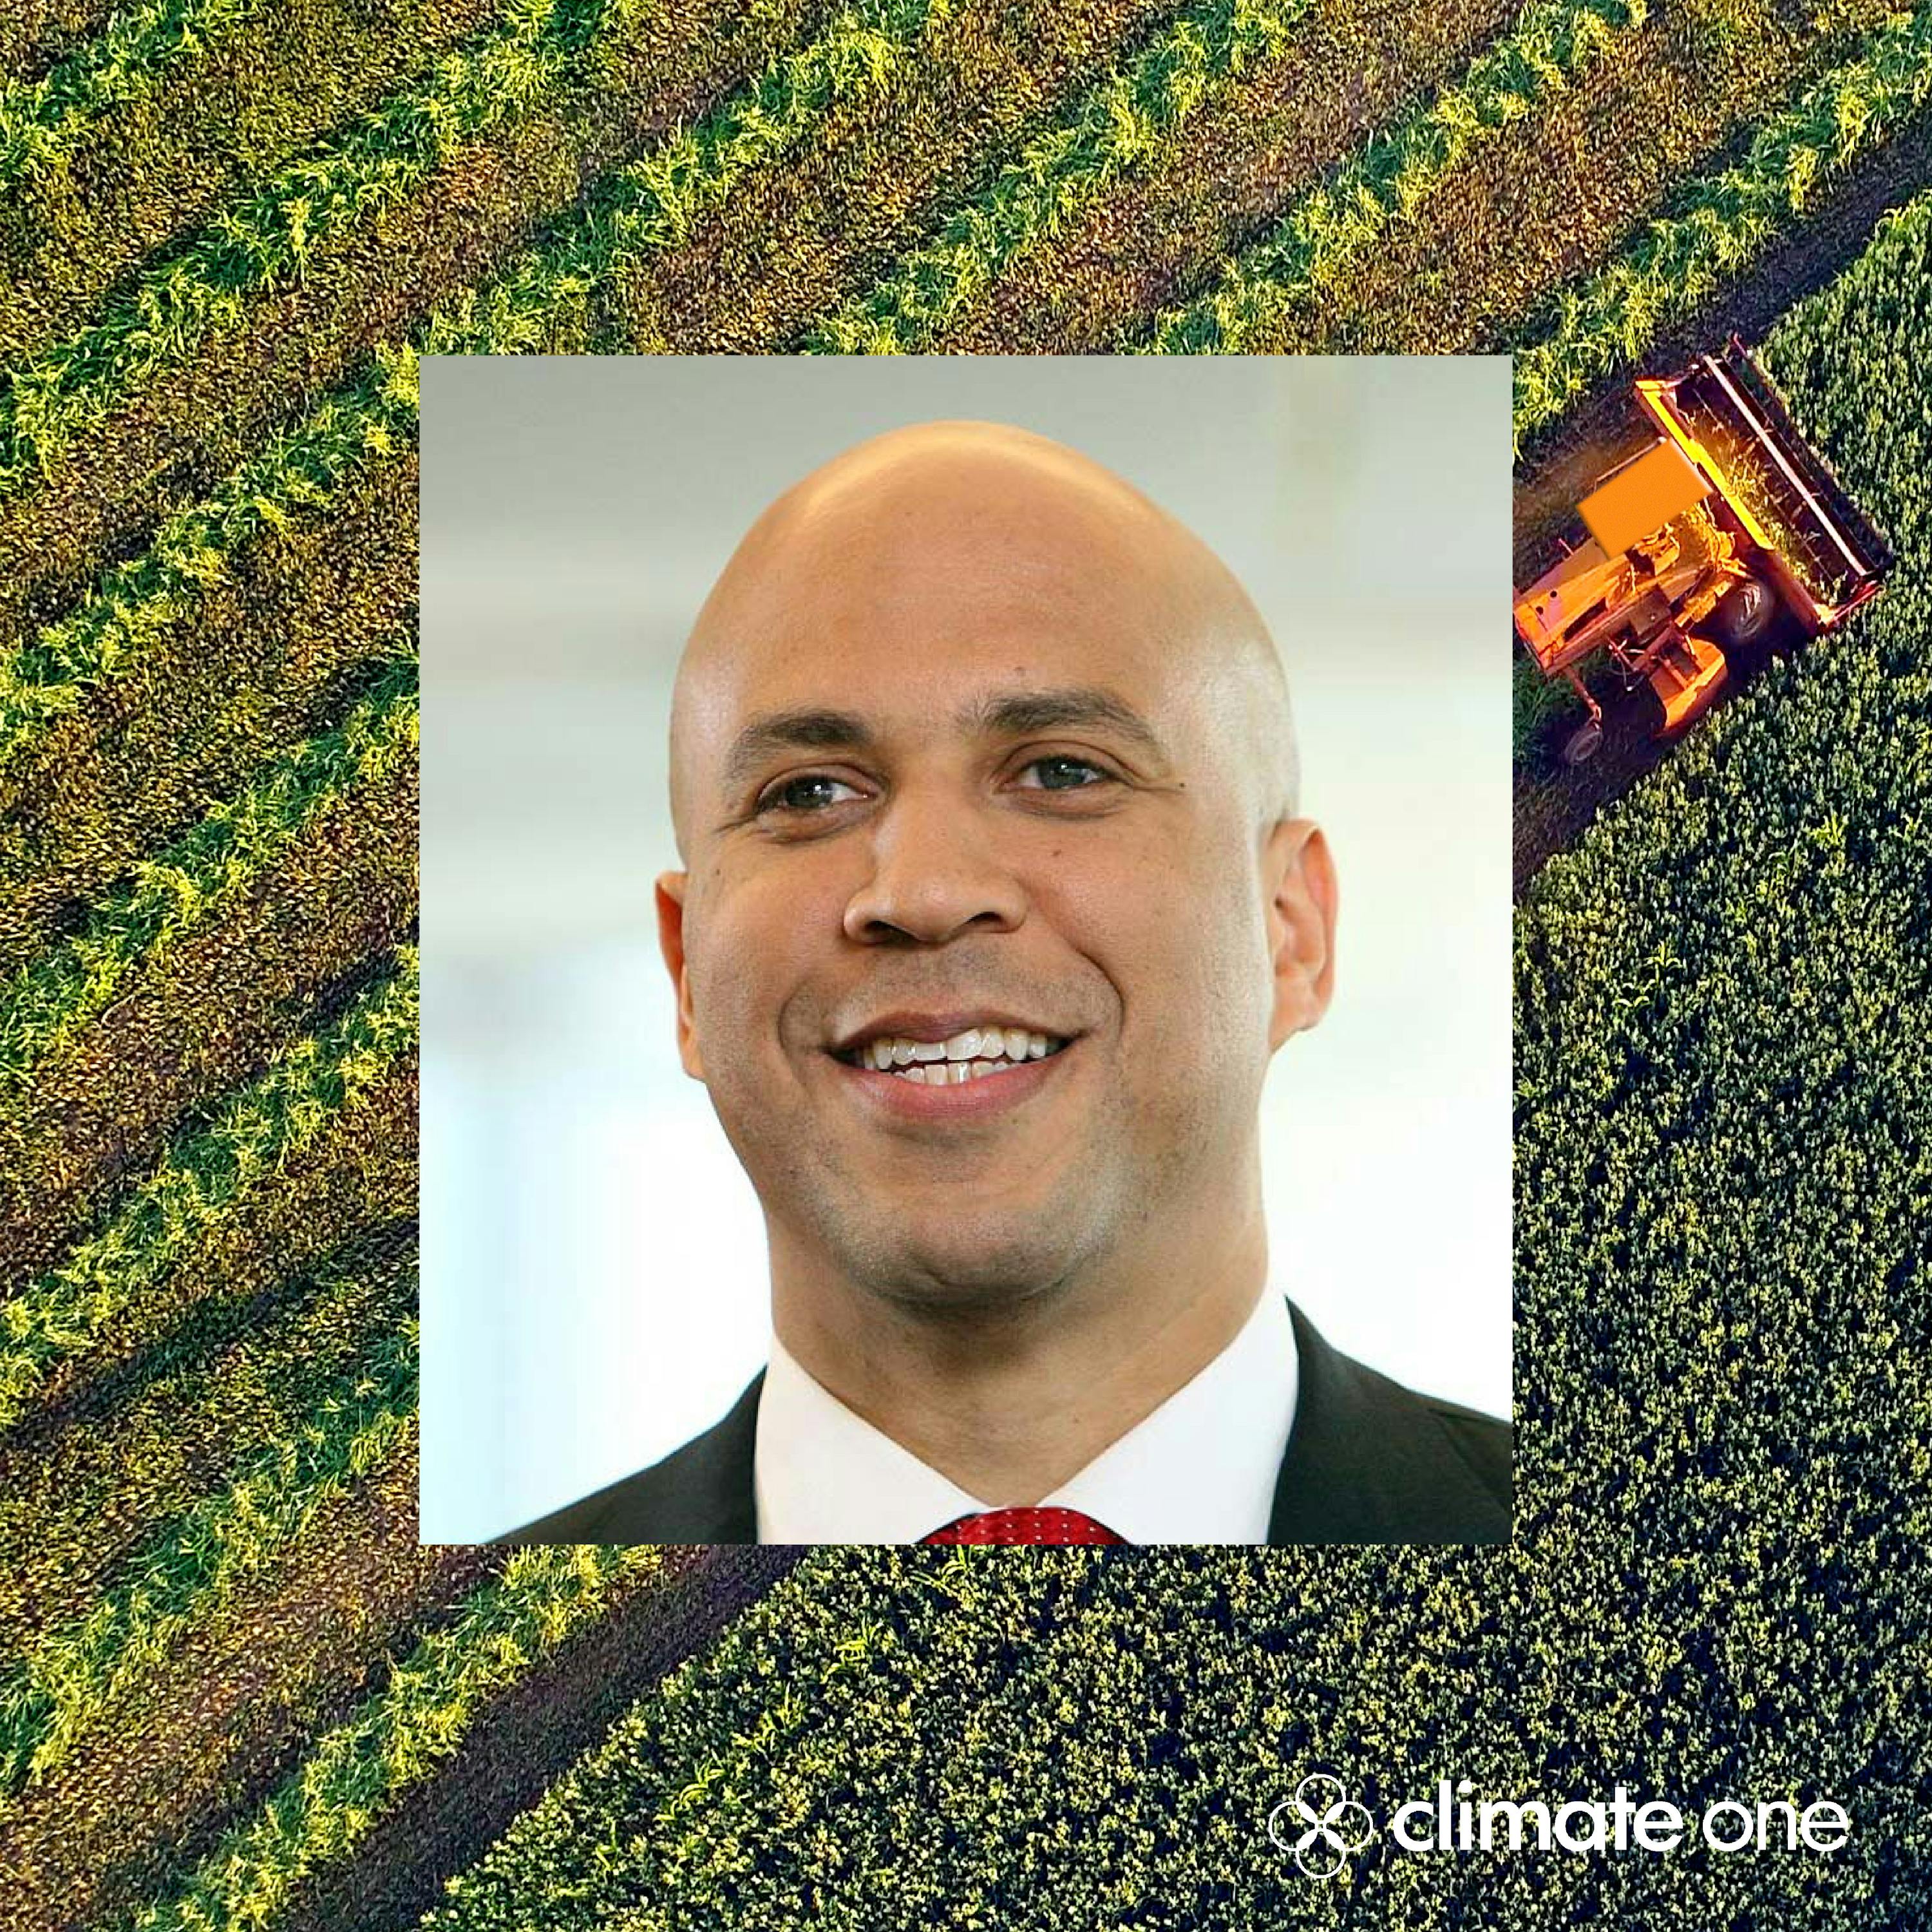 Cory Booker: Taking on Big Ag & Going Big on Climate